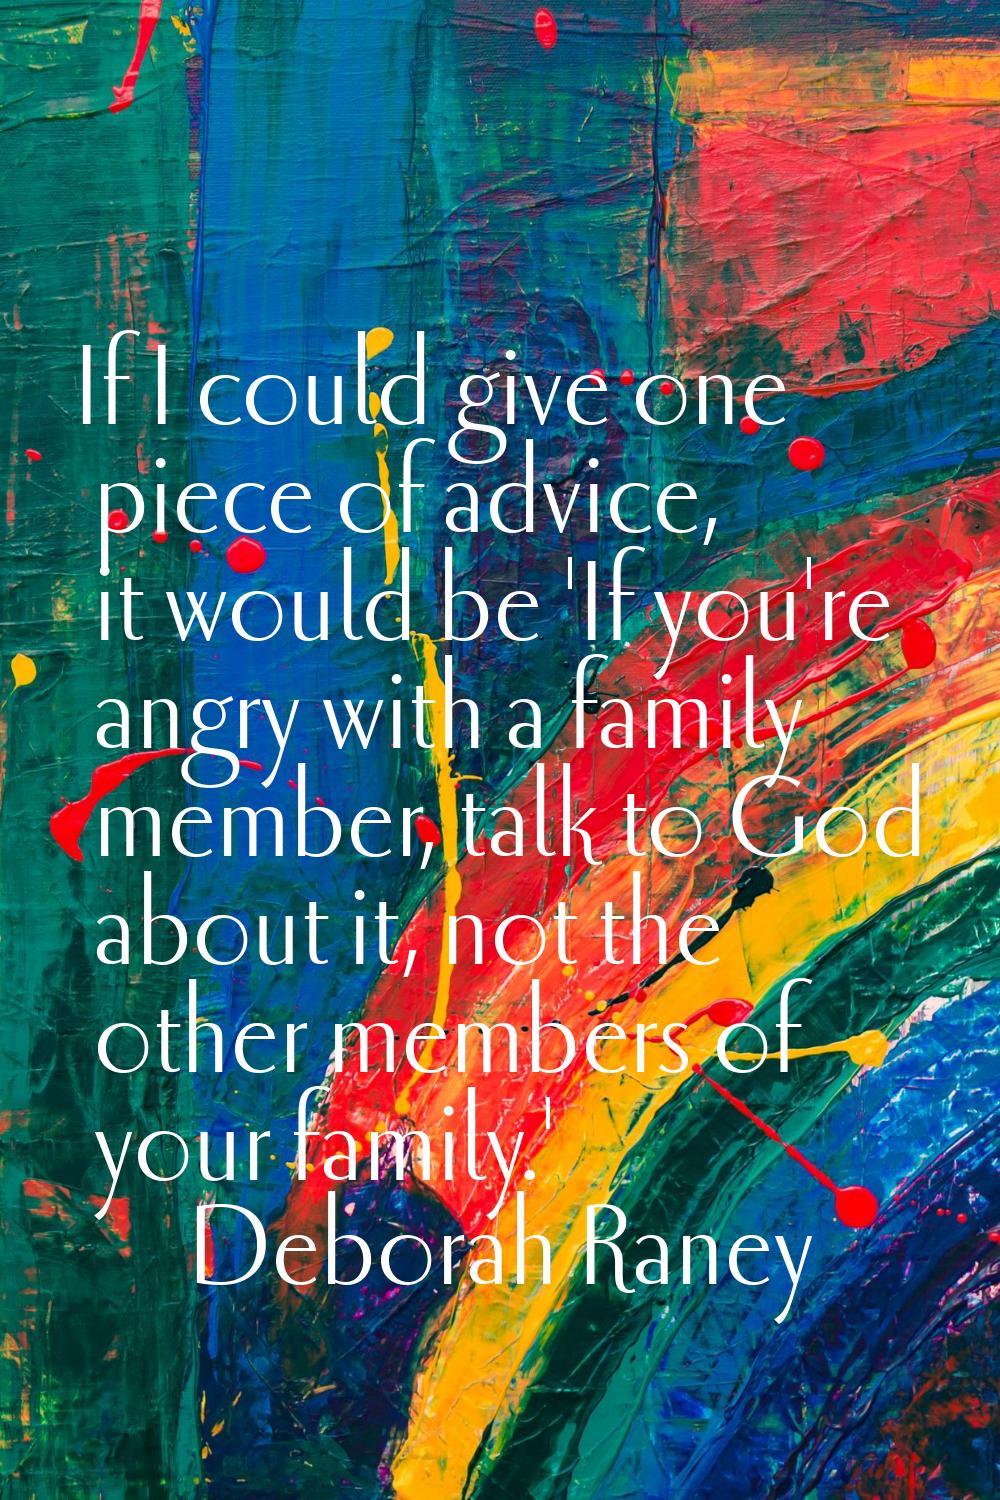 If I could give one piece of advice, it would be 'If you're angry with a family member, talk to God